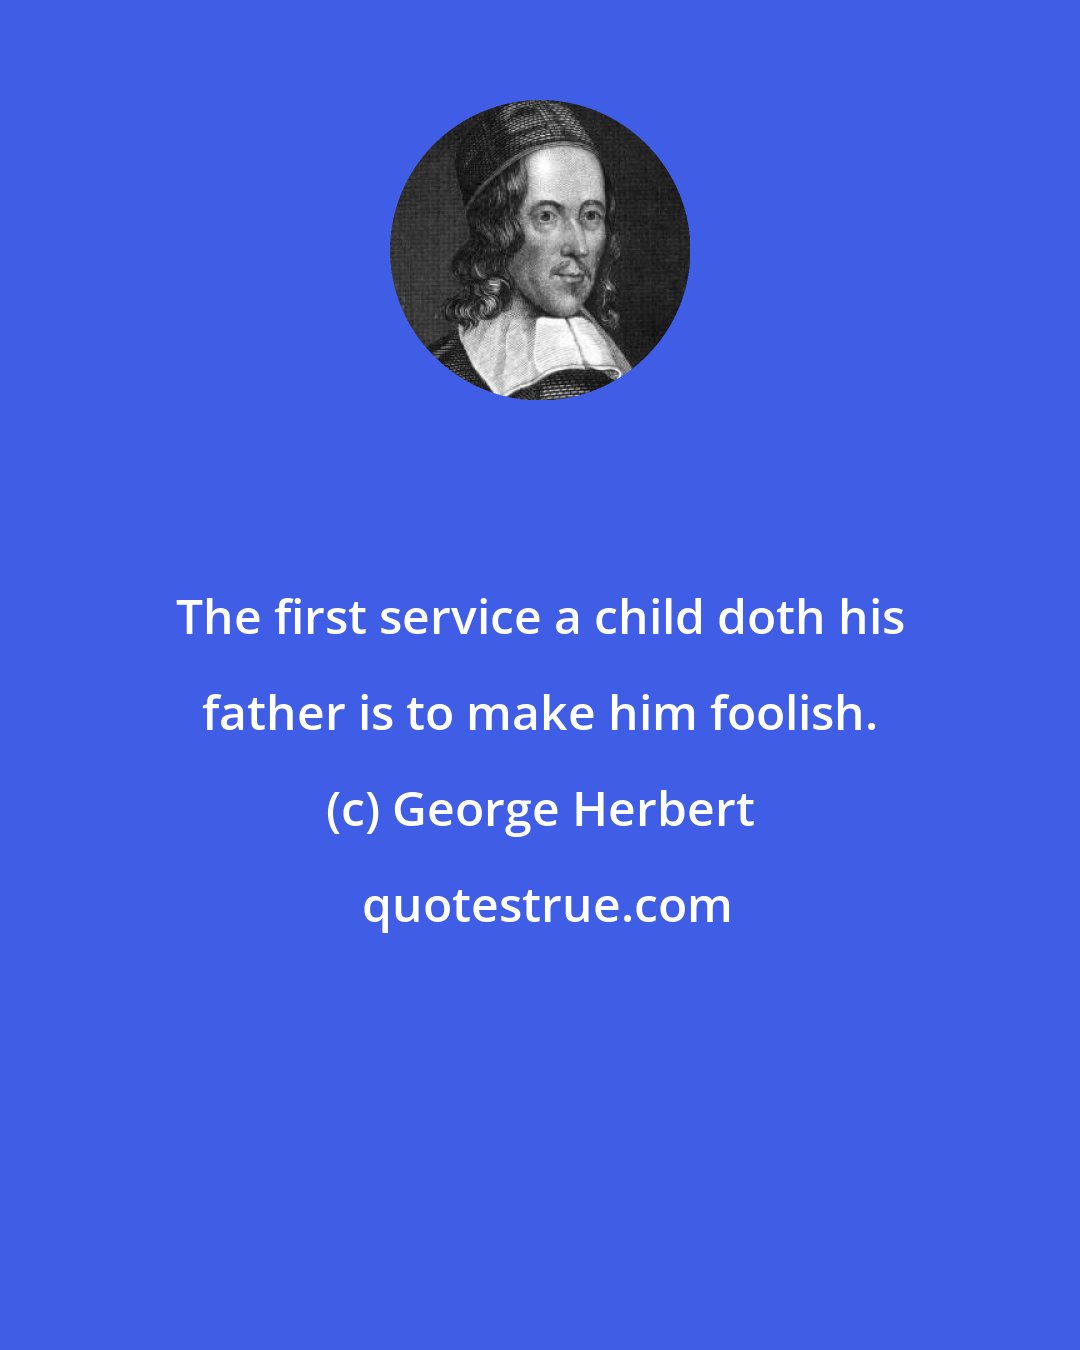 George Herbert: The first service a child doth his father is to make him foolish.